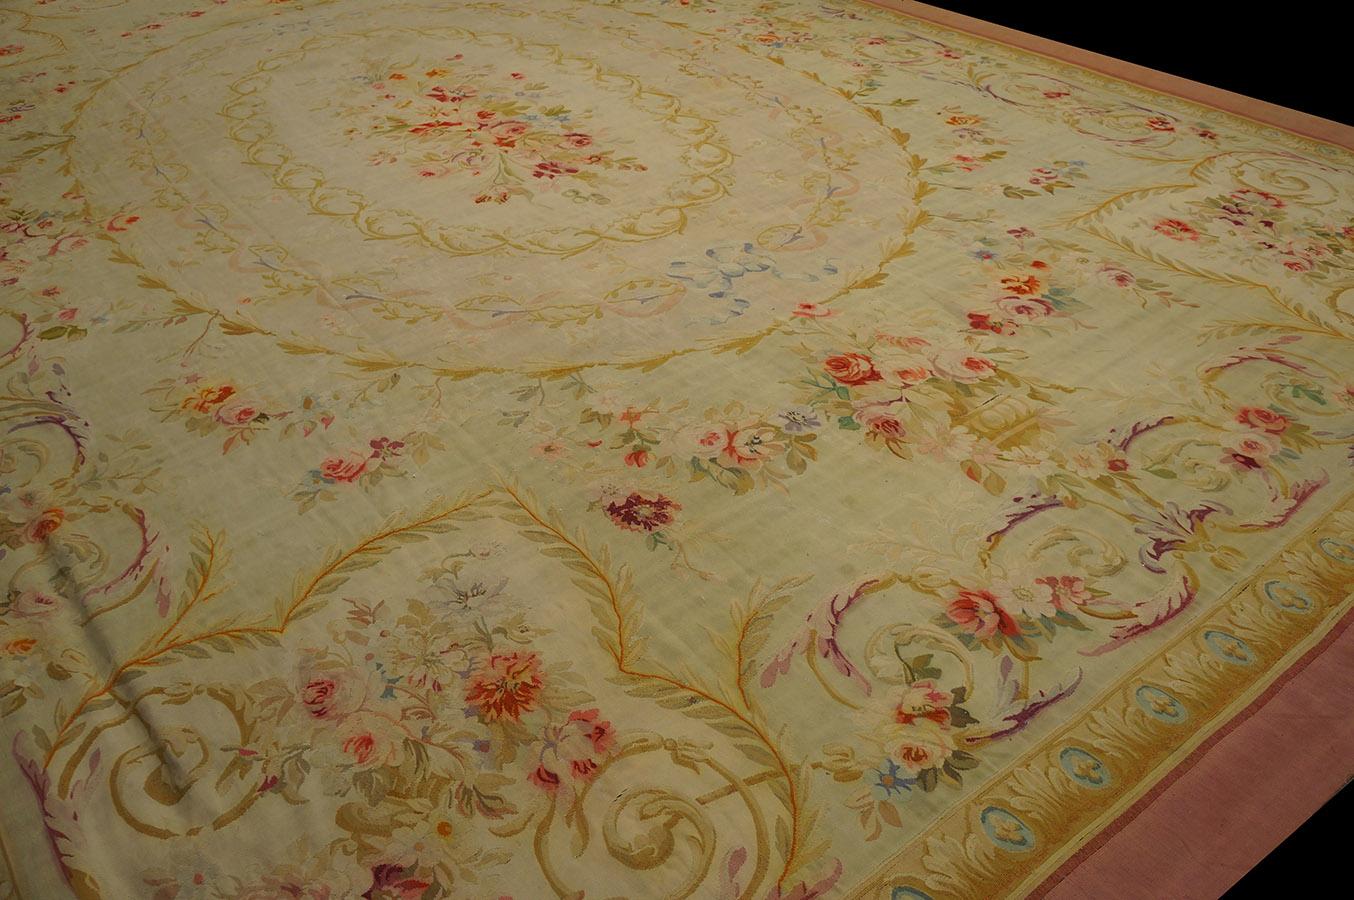 Early 20th Century French Aubusson Carpet ( 14'5' x 20'9'' - 440 x 633 ) 8